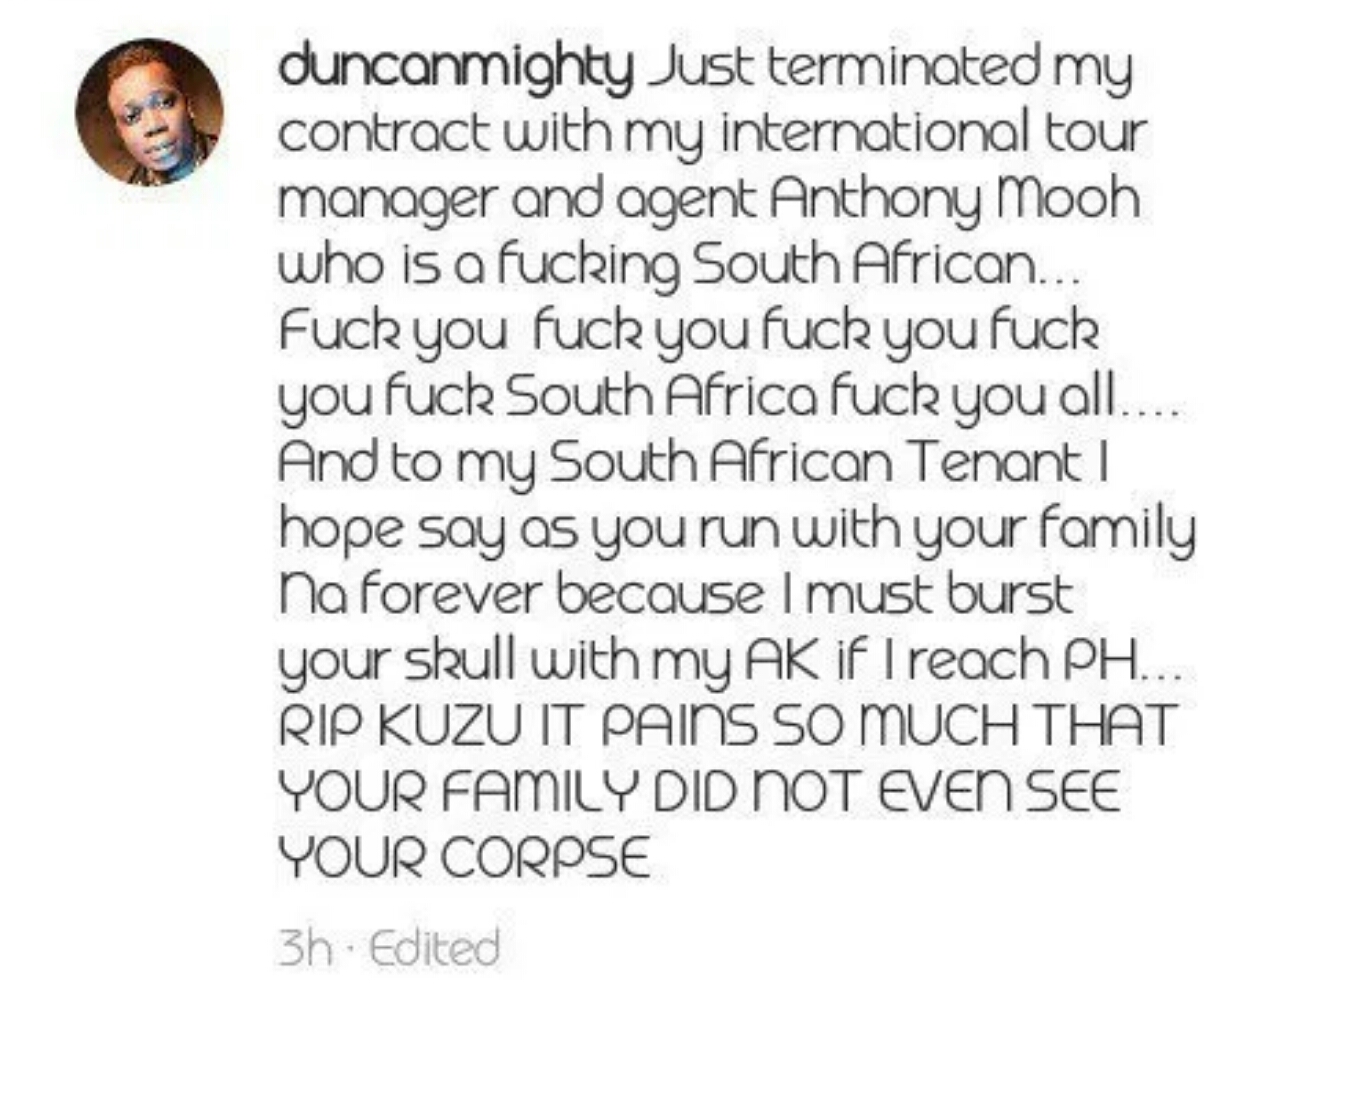 Duncan Mighty fires his South African manager and vows to shoot his South African tenant following the killing of his friend